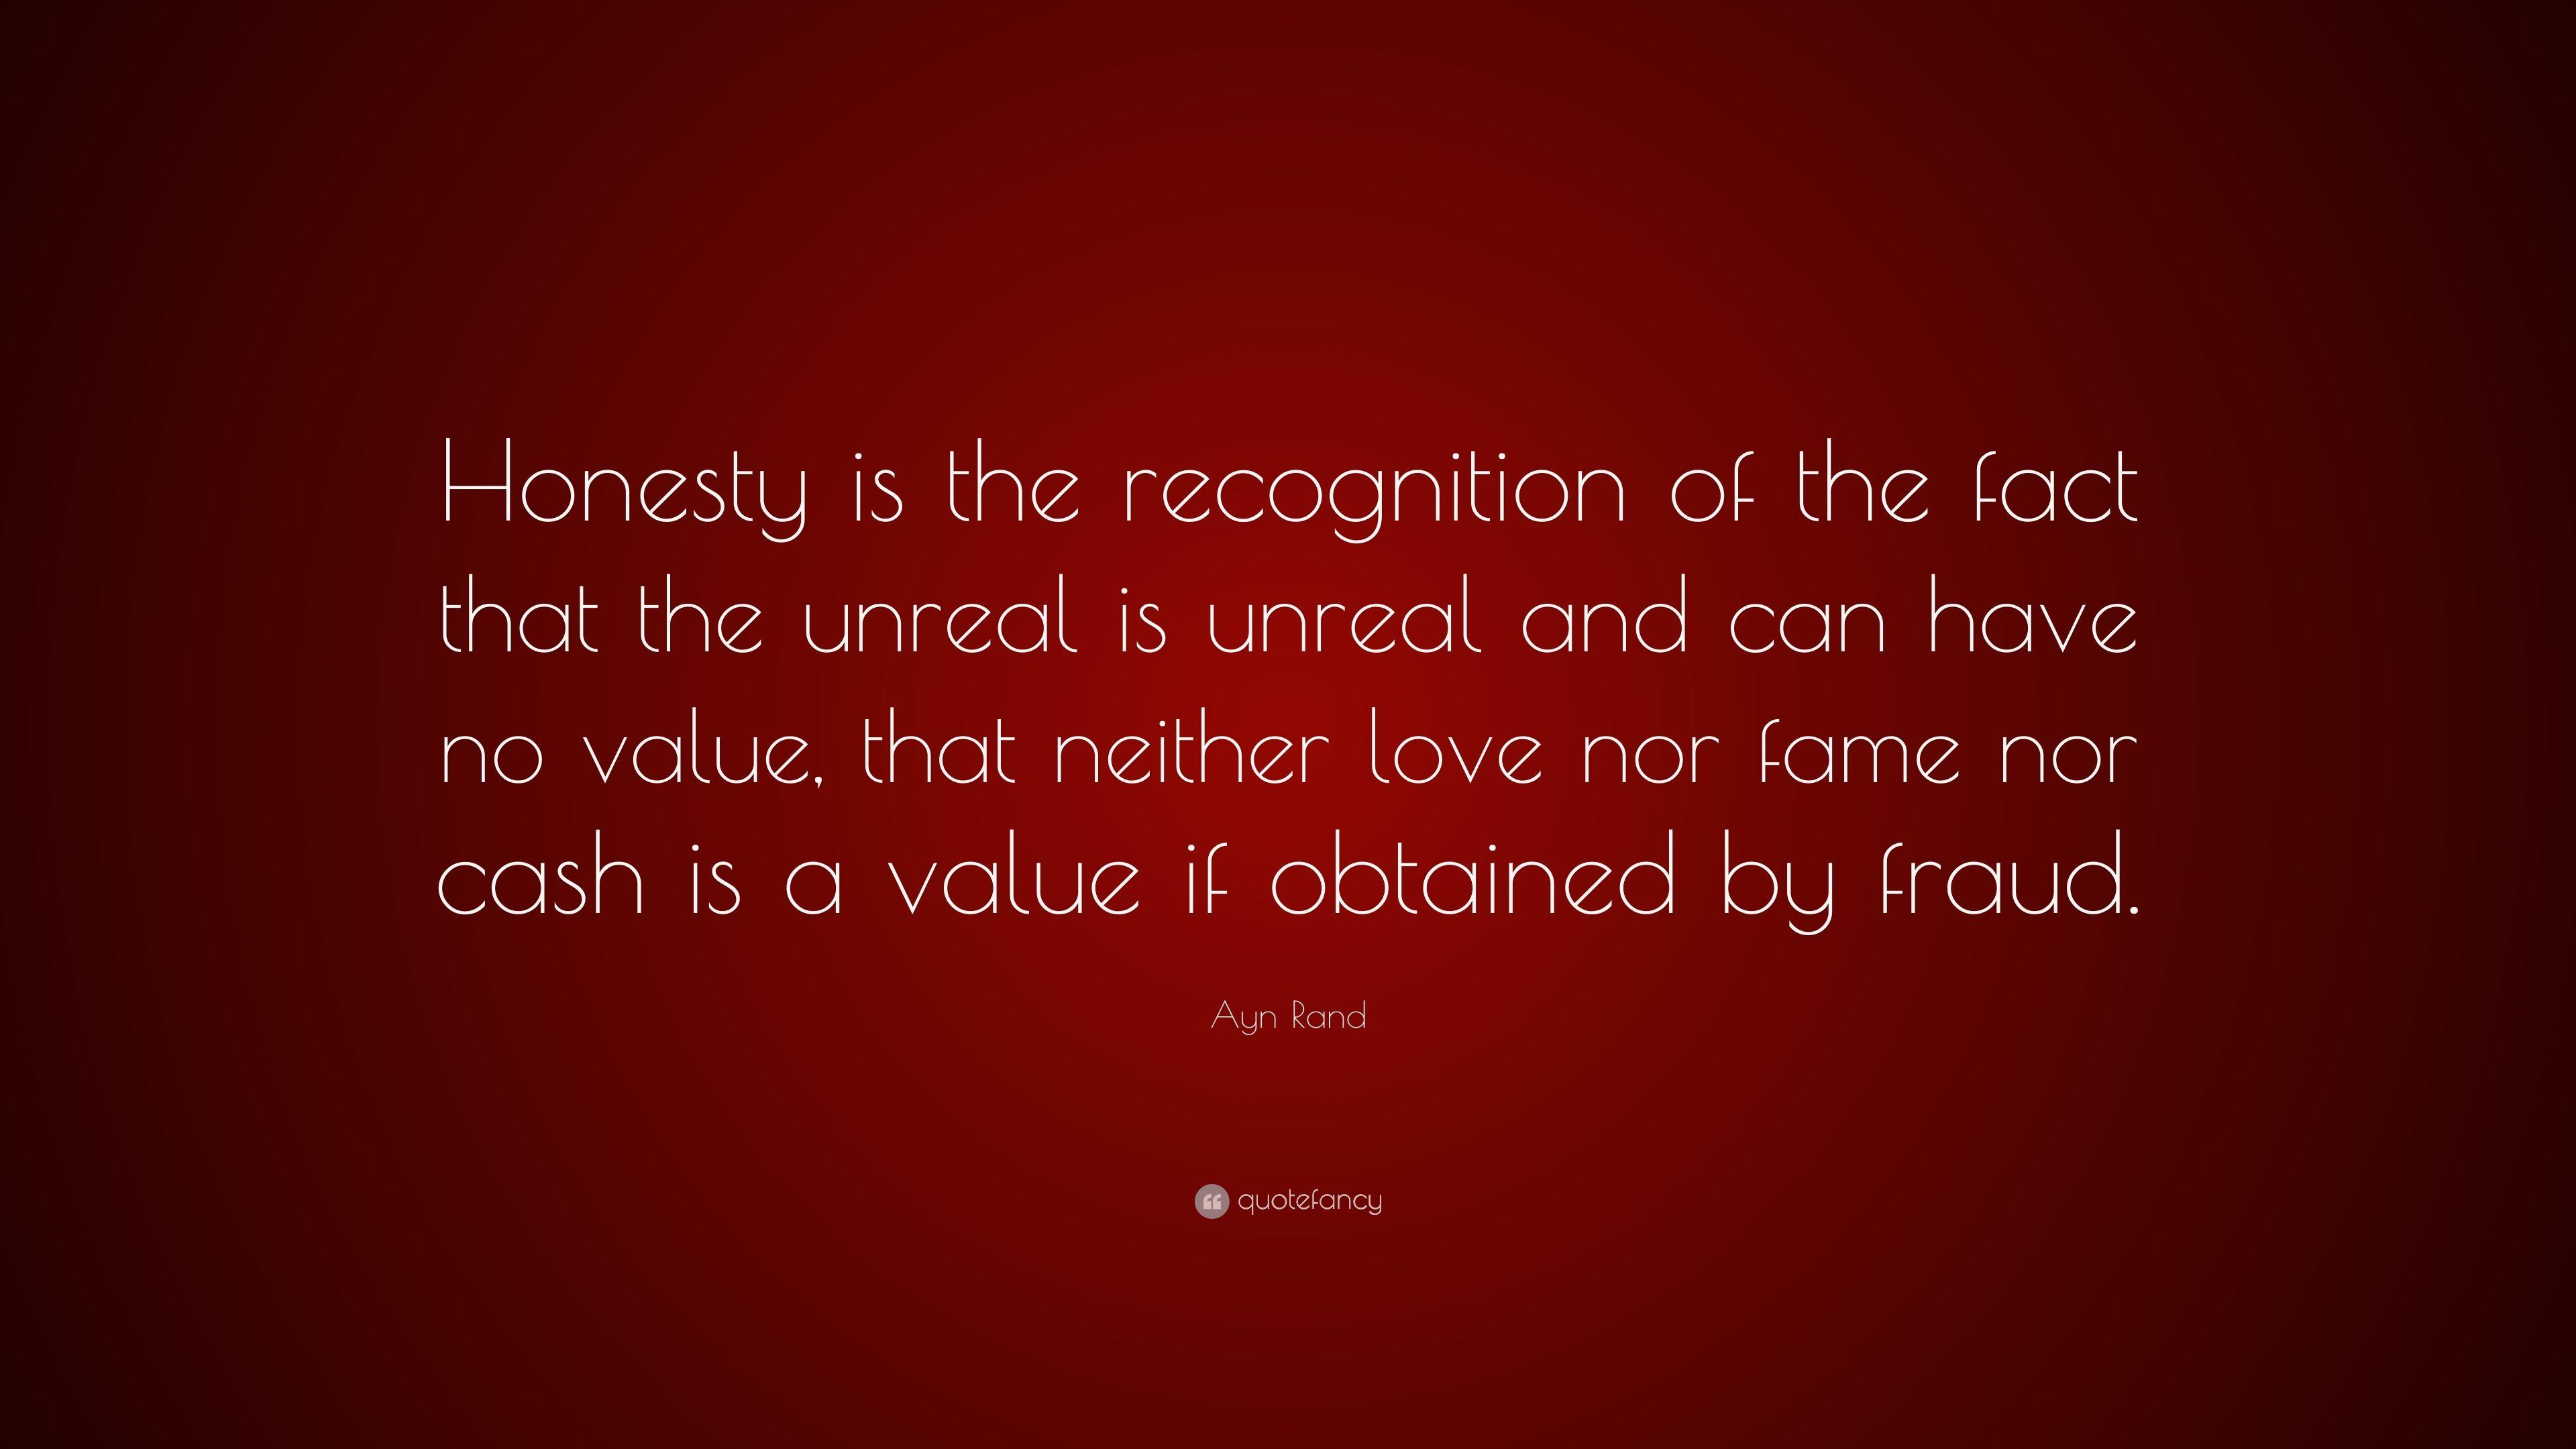 Ayn Rand Quote: “Honesty is the recognition of the fact that